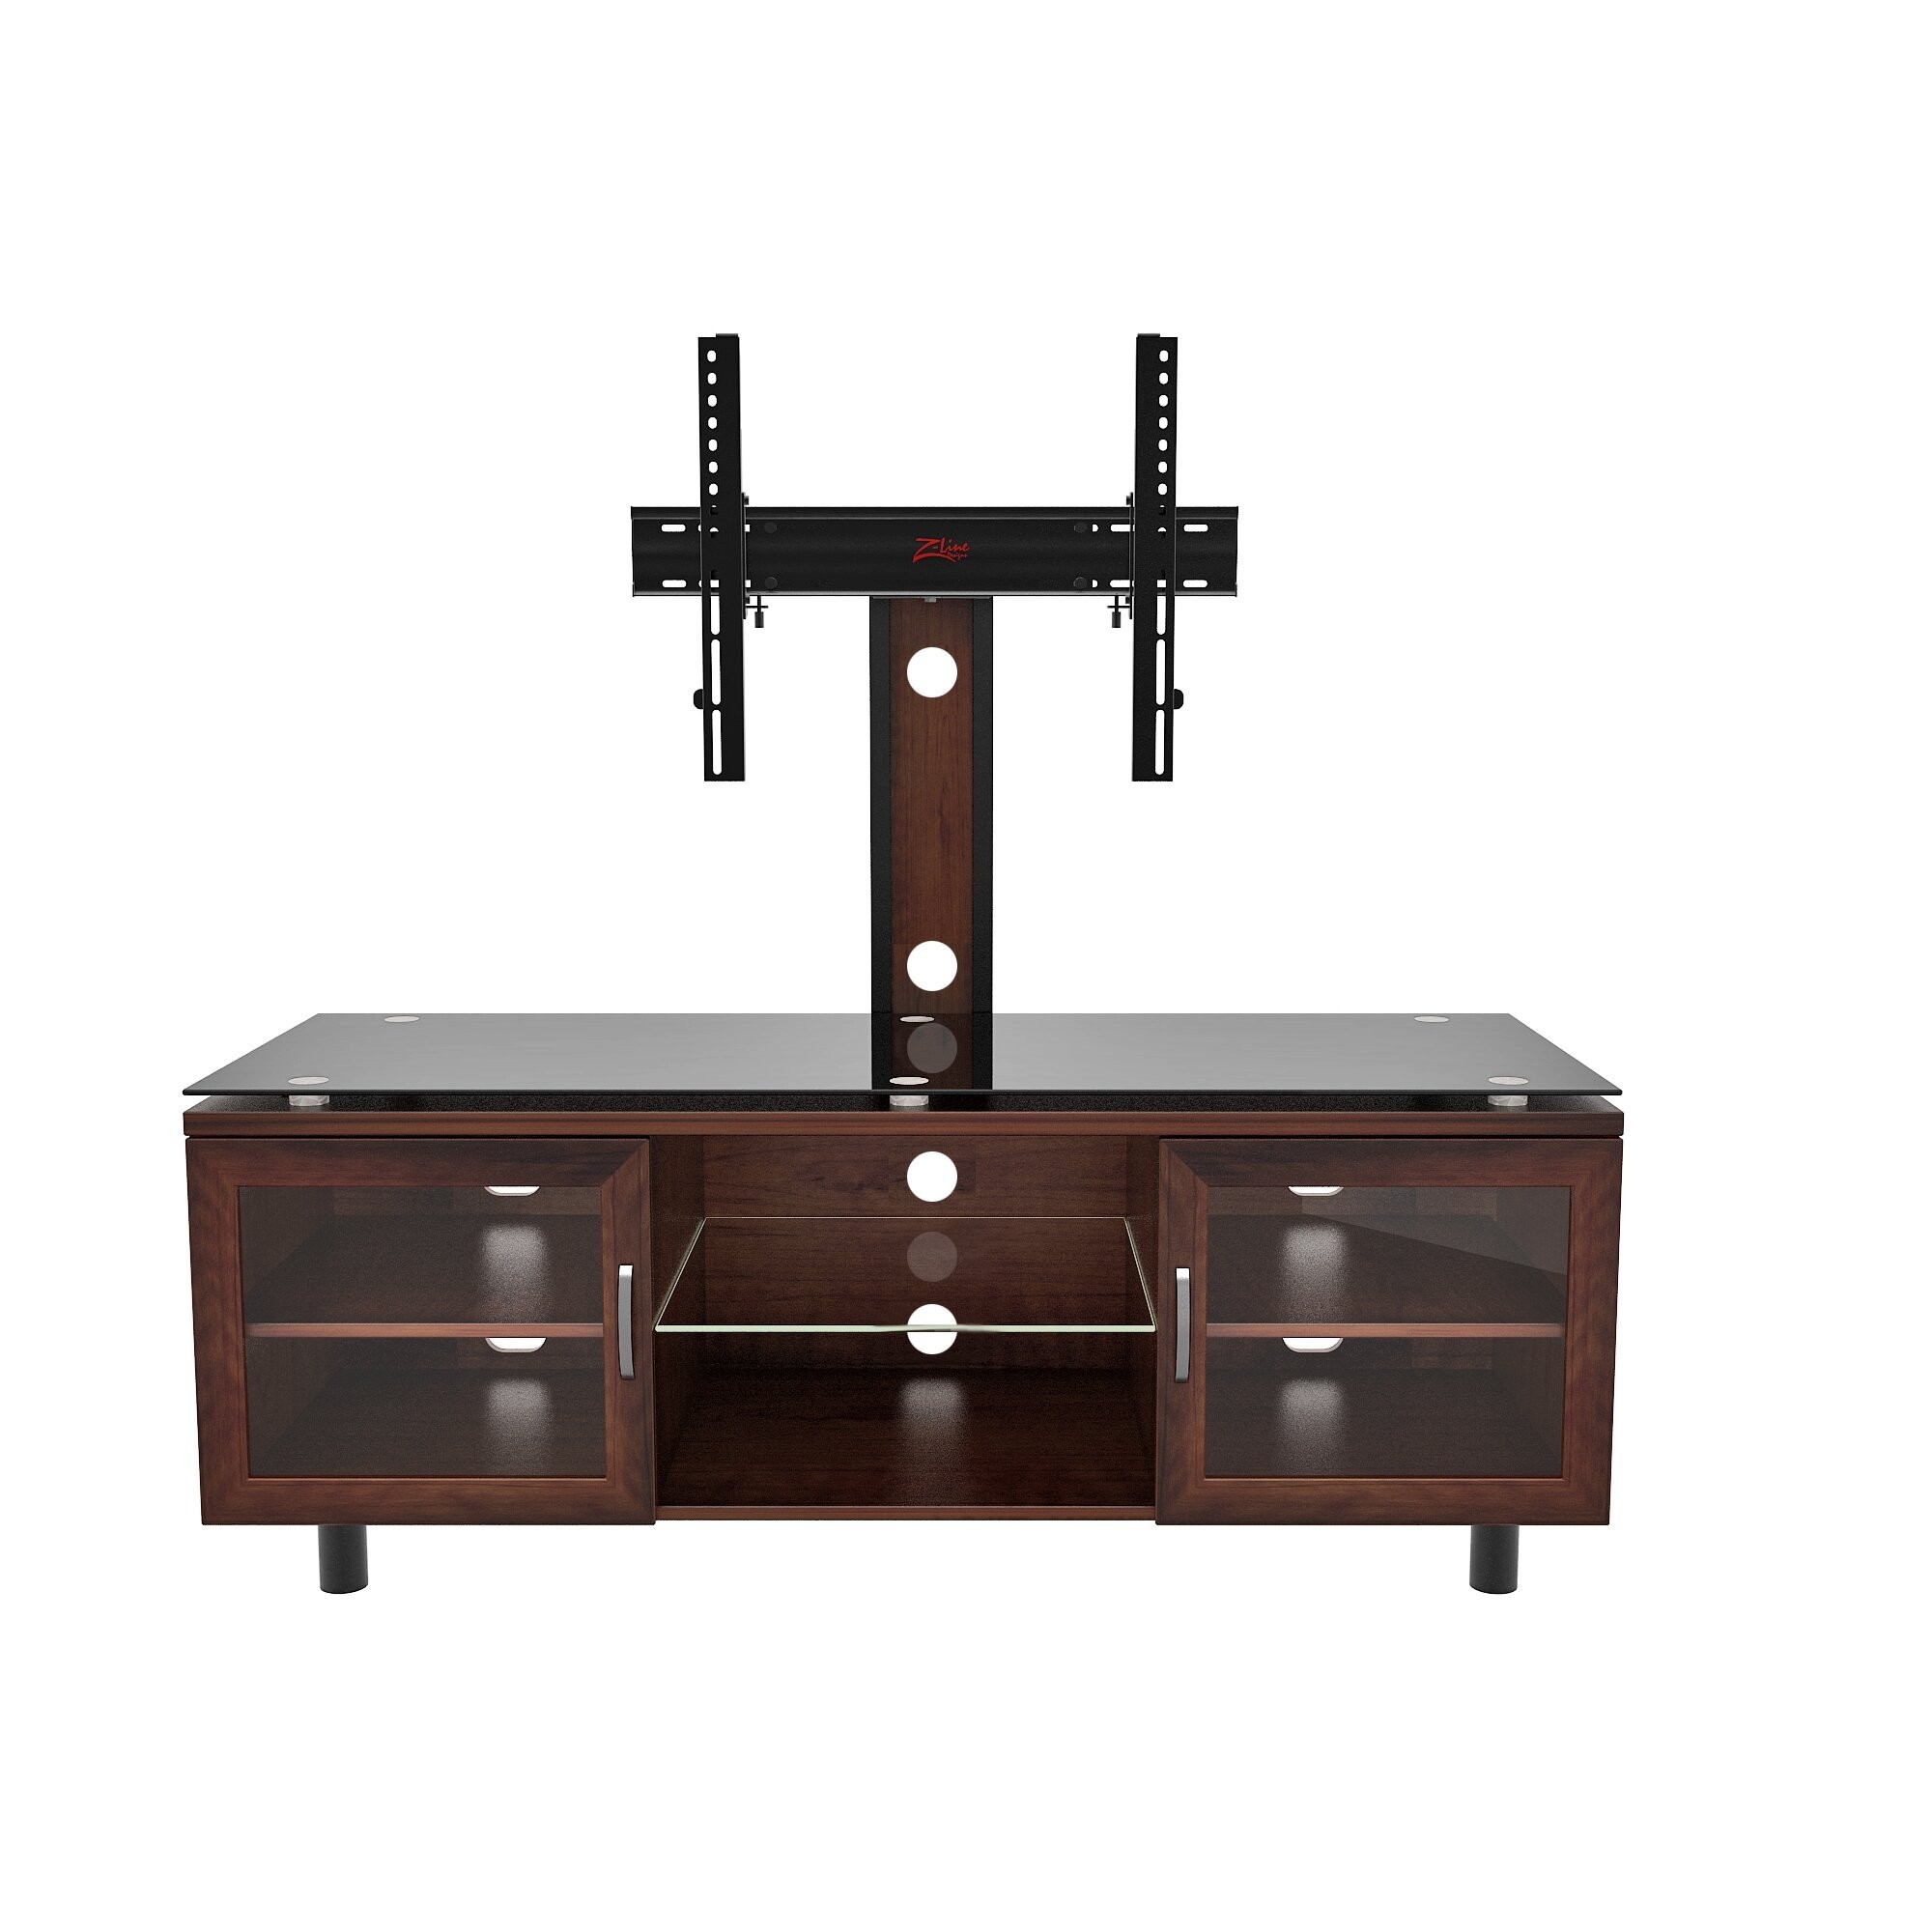 Z Line Designs Merako Espresso Tv Stand With Integrated Mount For Tvs Up To 70